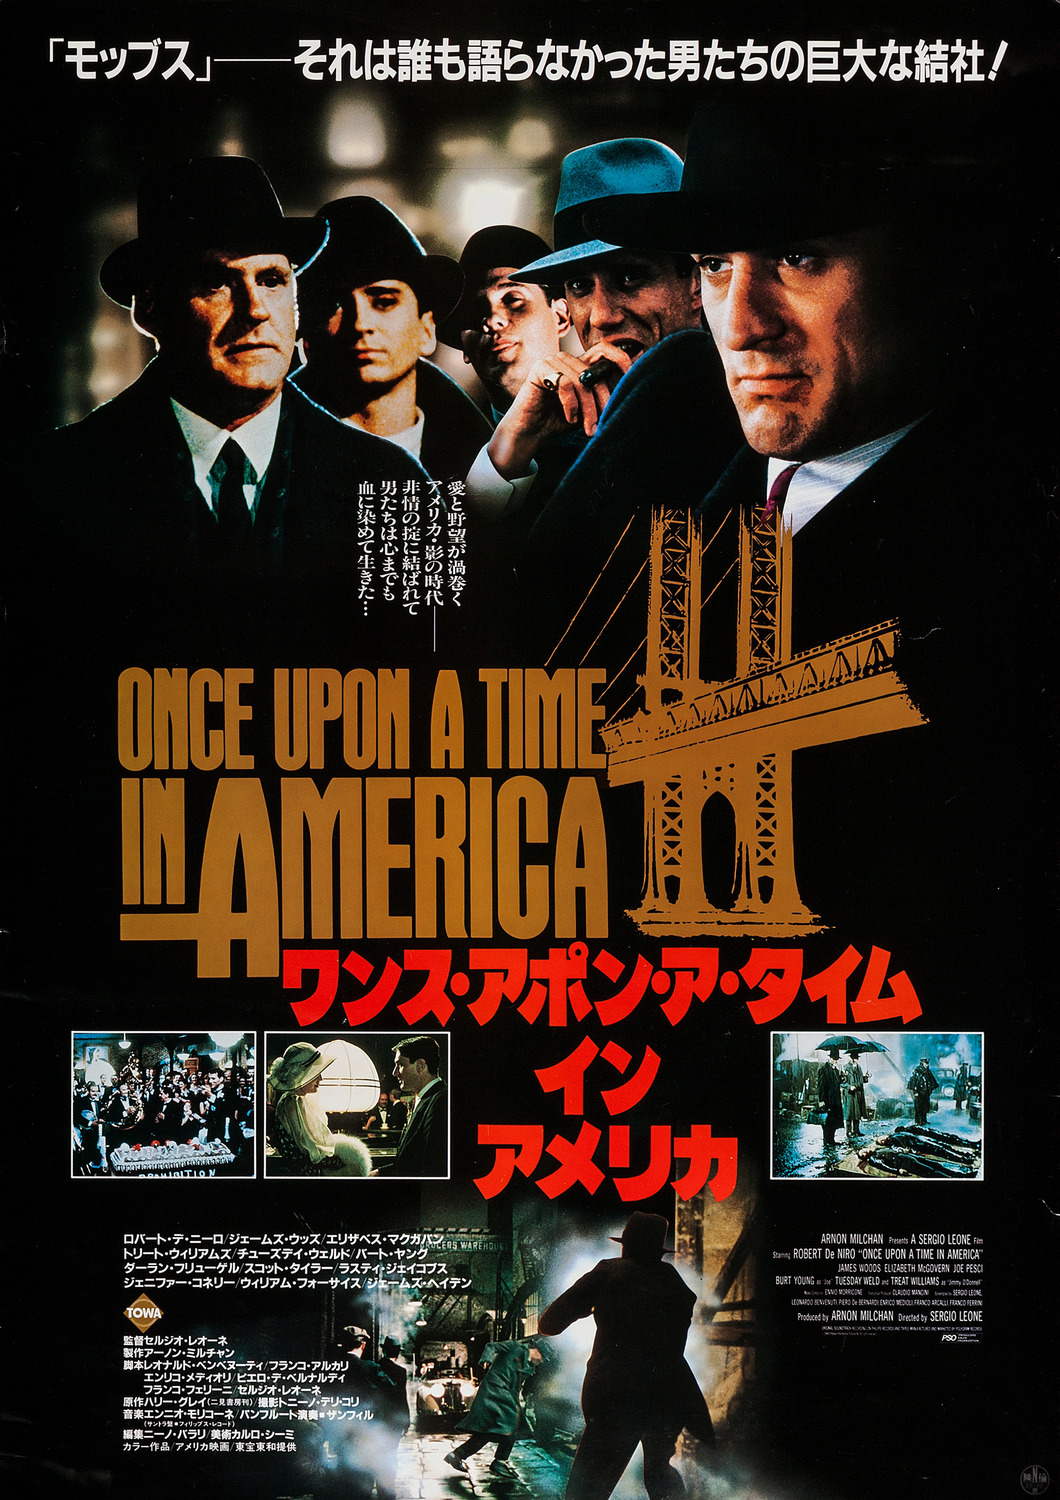 Extra Large Movie Poster Image for Once Upon a Time in America (#5 of 6)